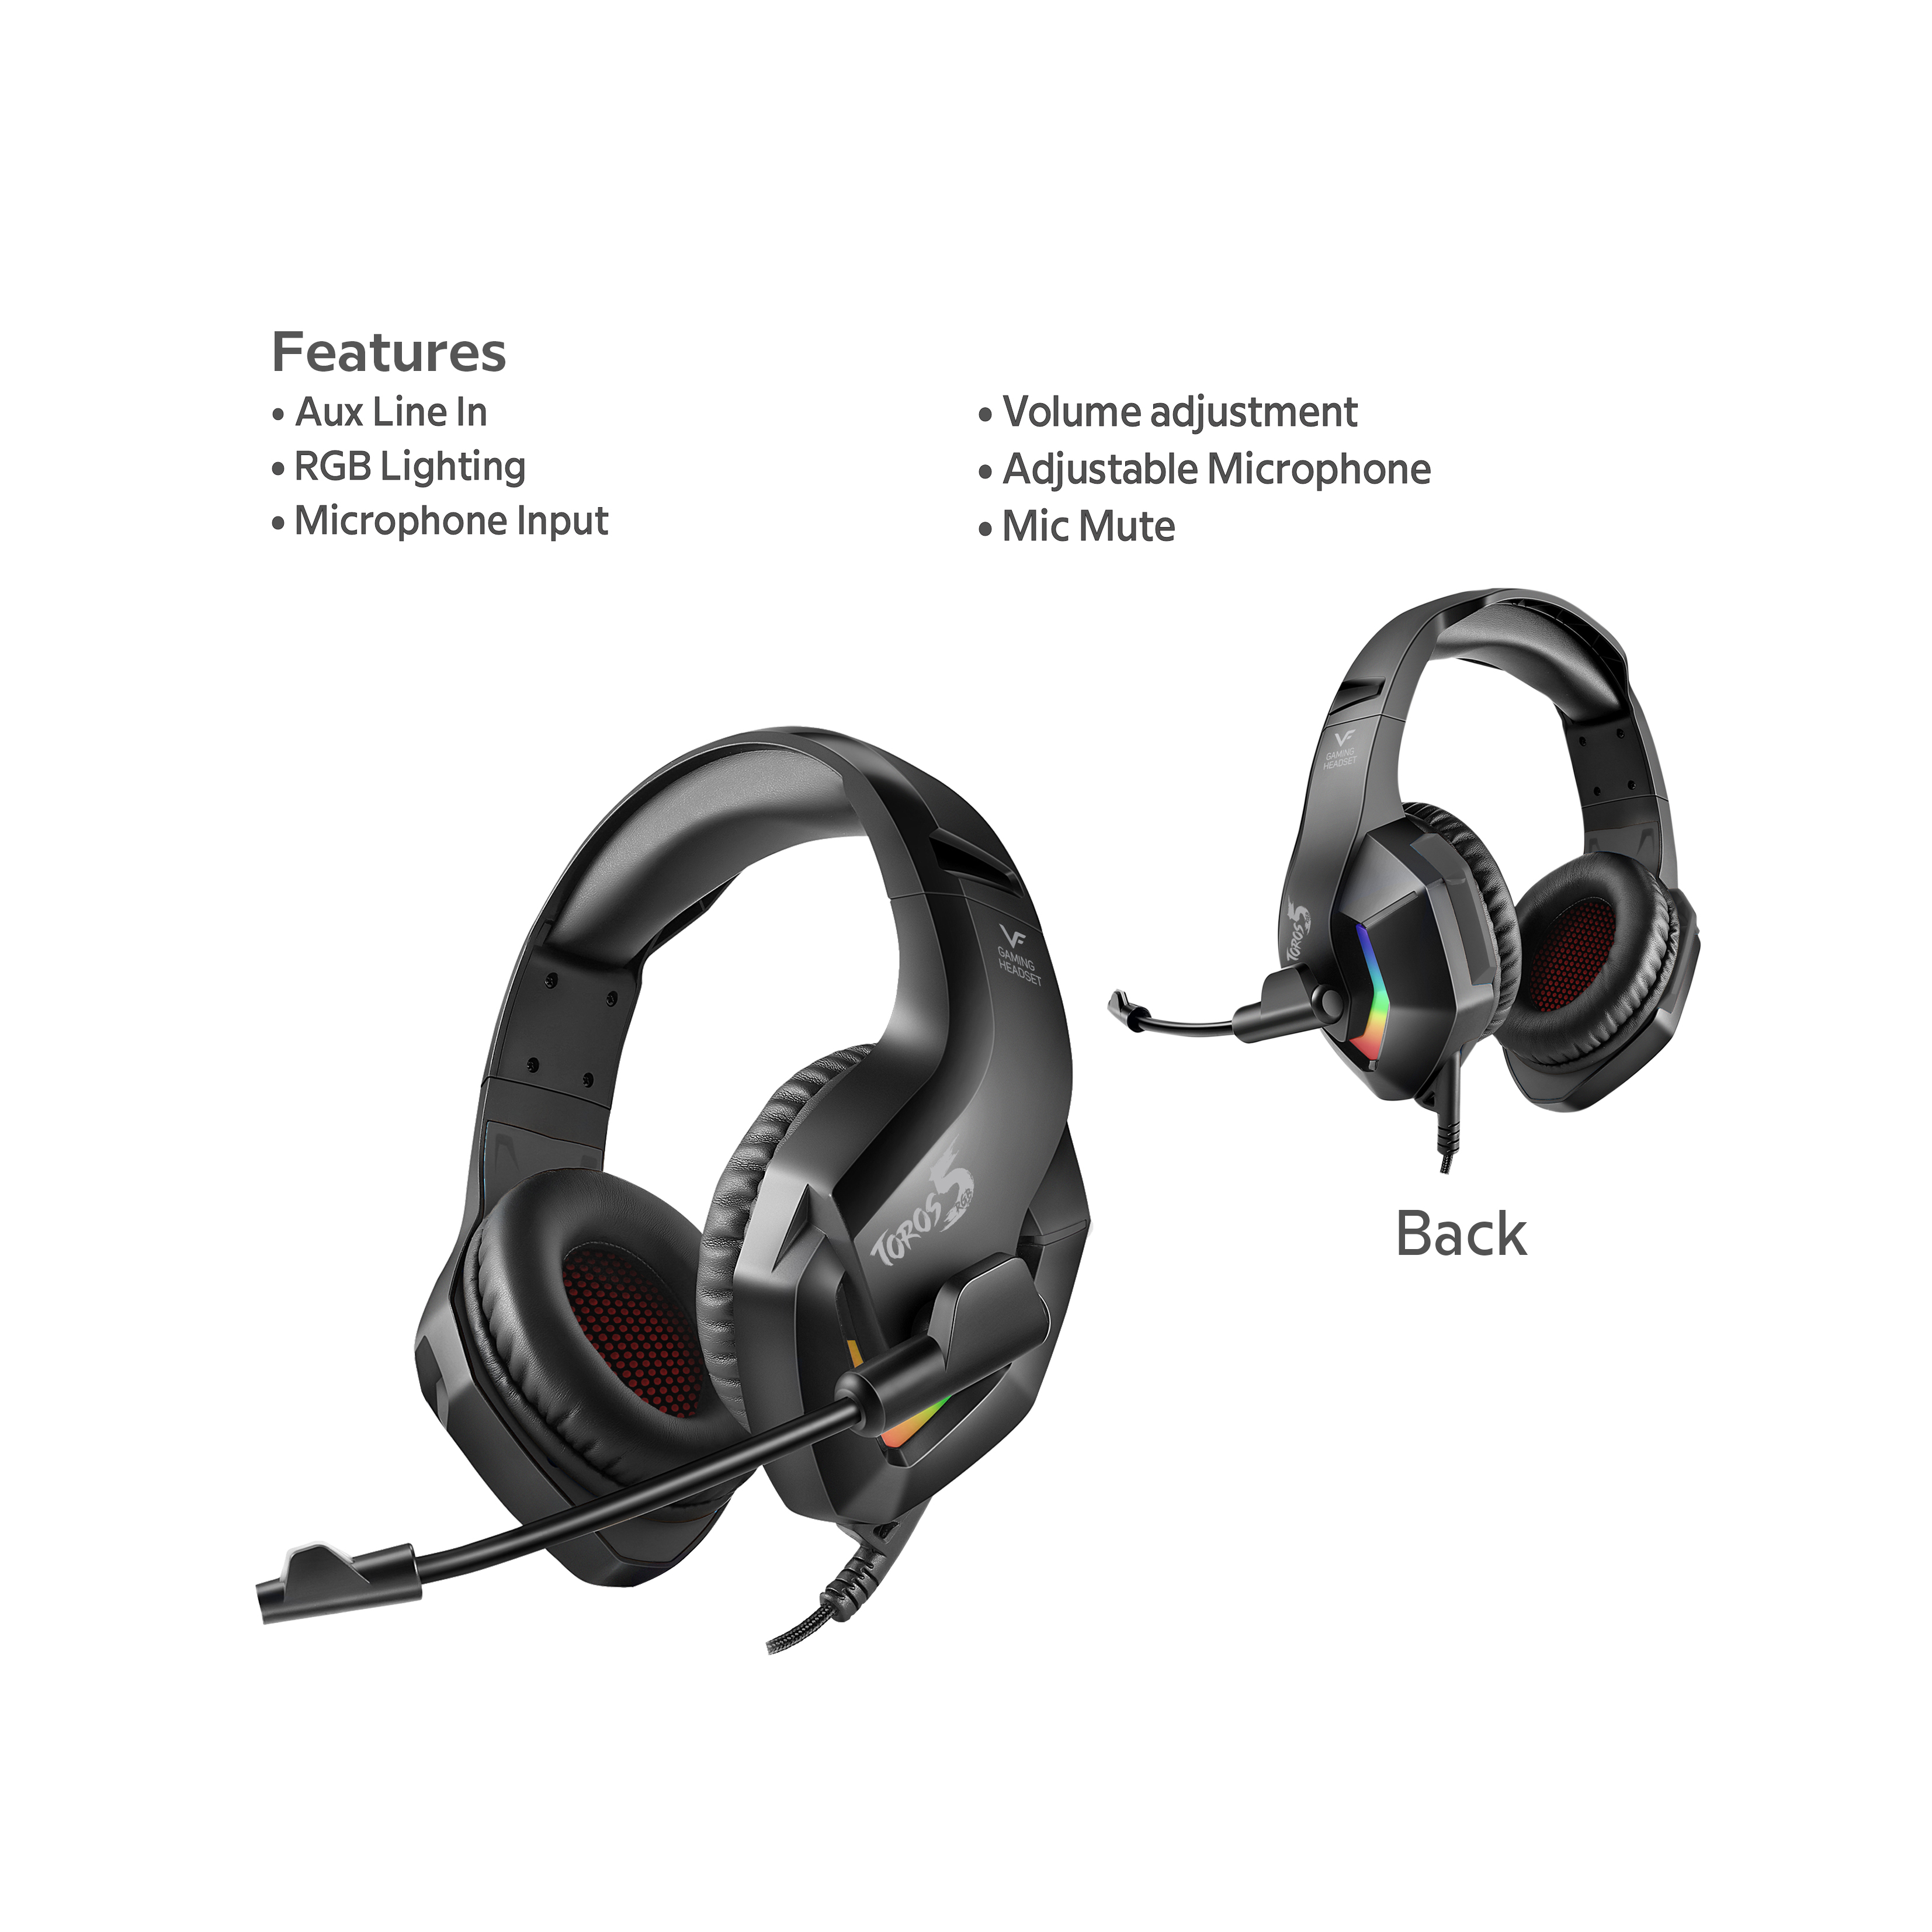 Vinnfier Toros 5 Pro Gaming Headset Extra Bass RGB LED Light Stereo Sound With Mic For Smartphones Tablets and Computer